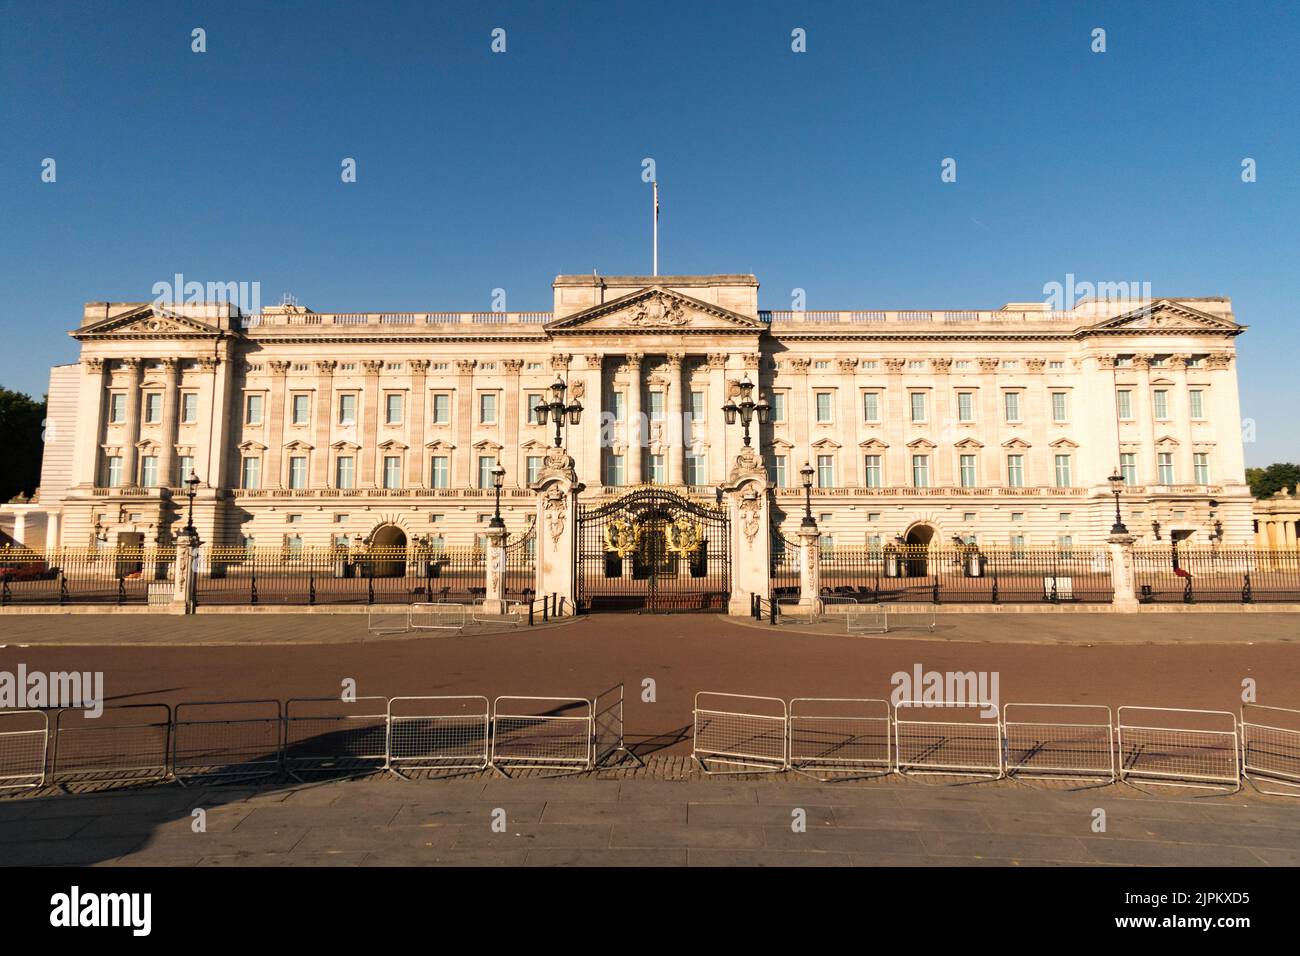 A view of the facade of Buckingham Palace on a sunny day in London Stock Photo